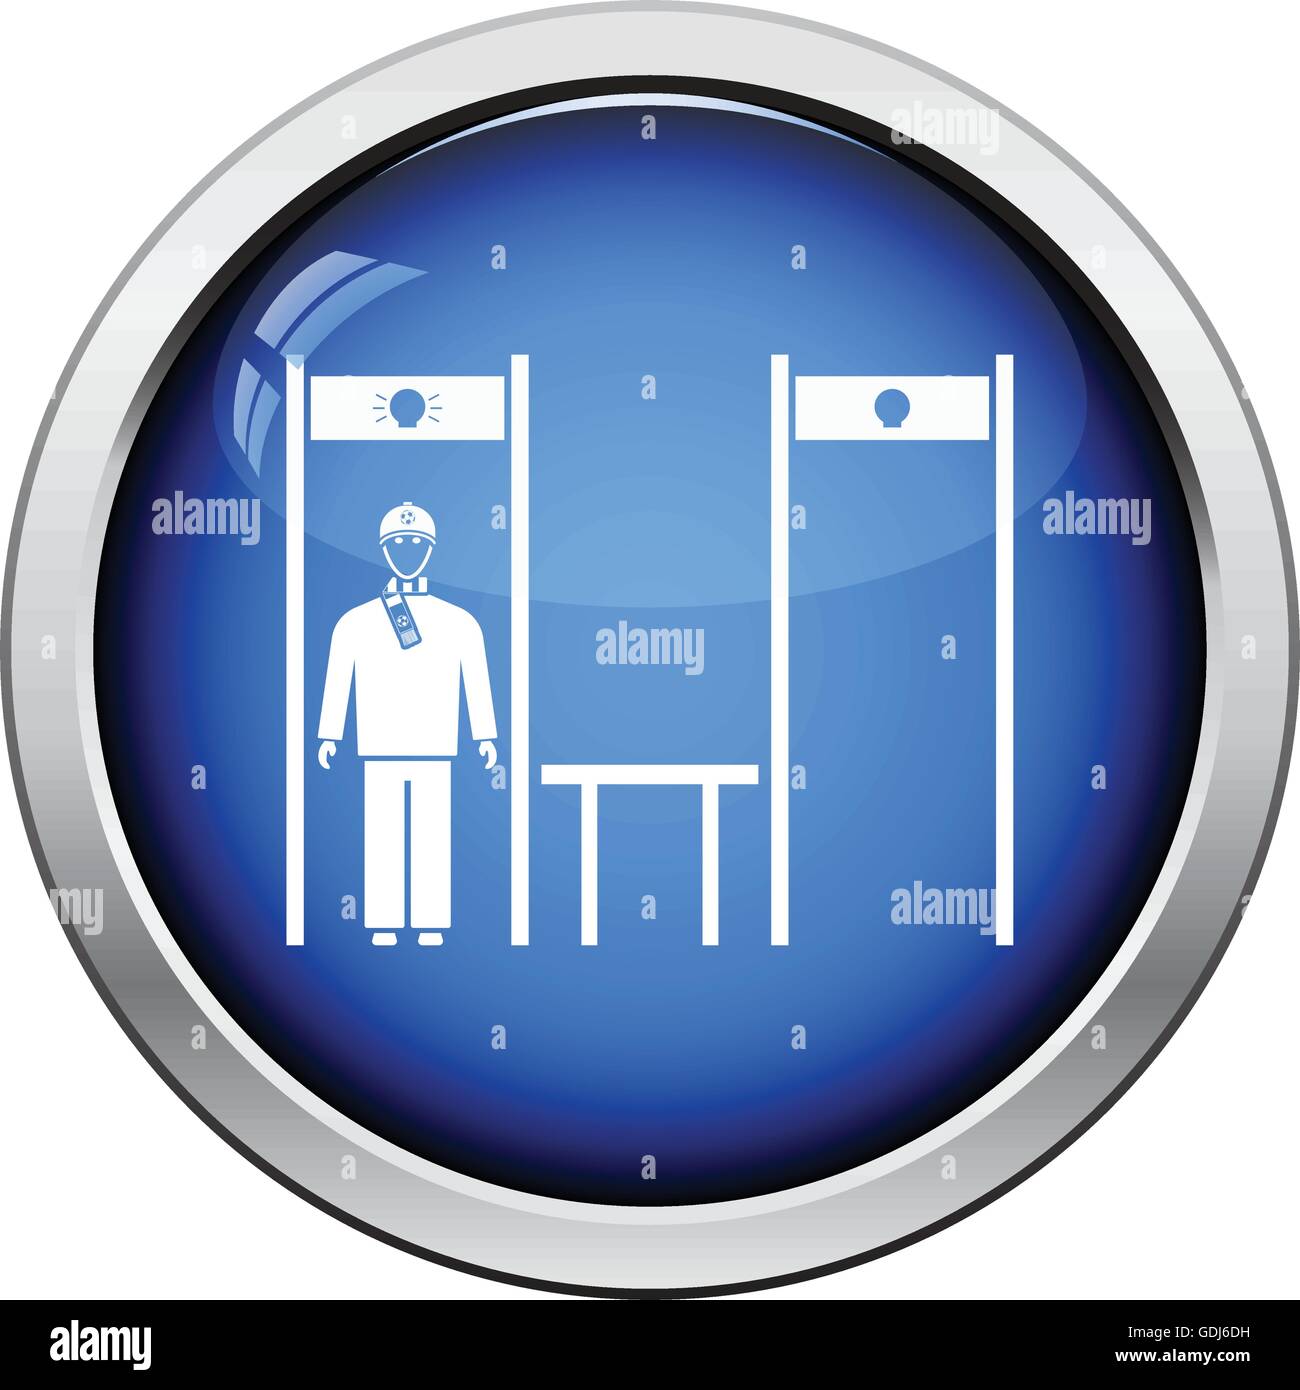 Stadium metal detector frame with inspecting fan icon. Glossy button design. Vector illustration. Stock Vector